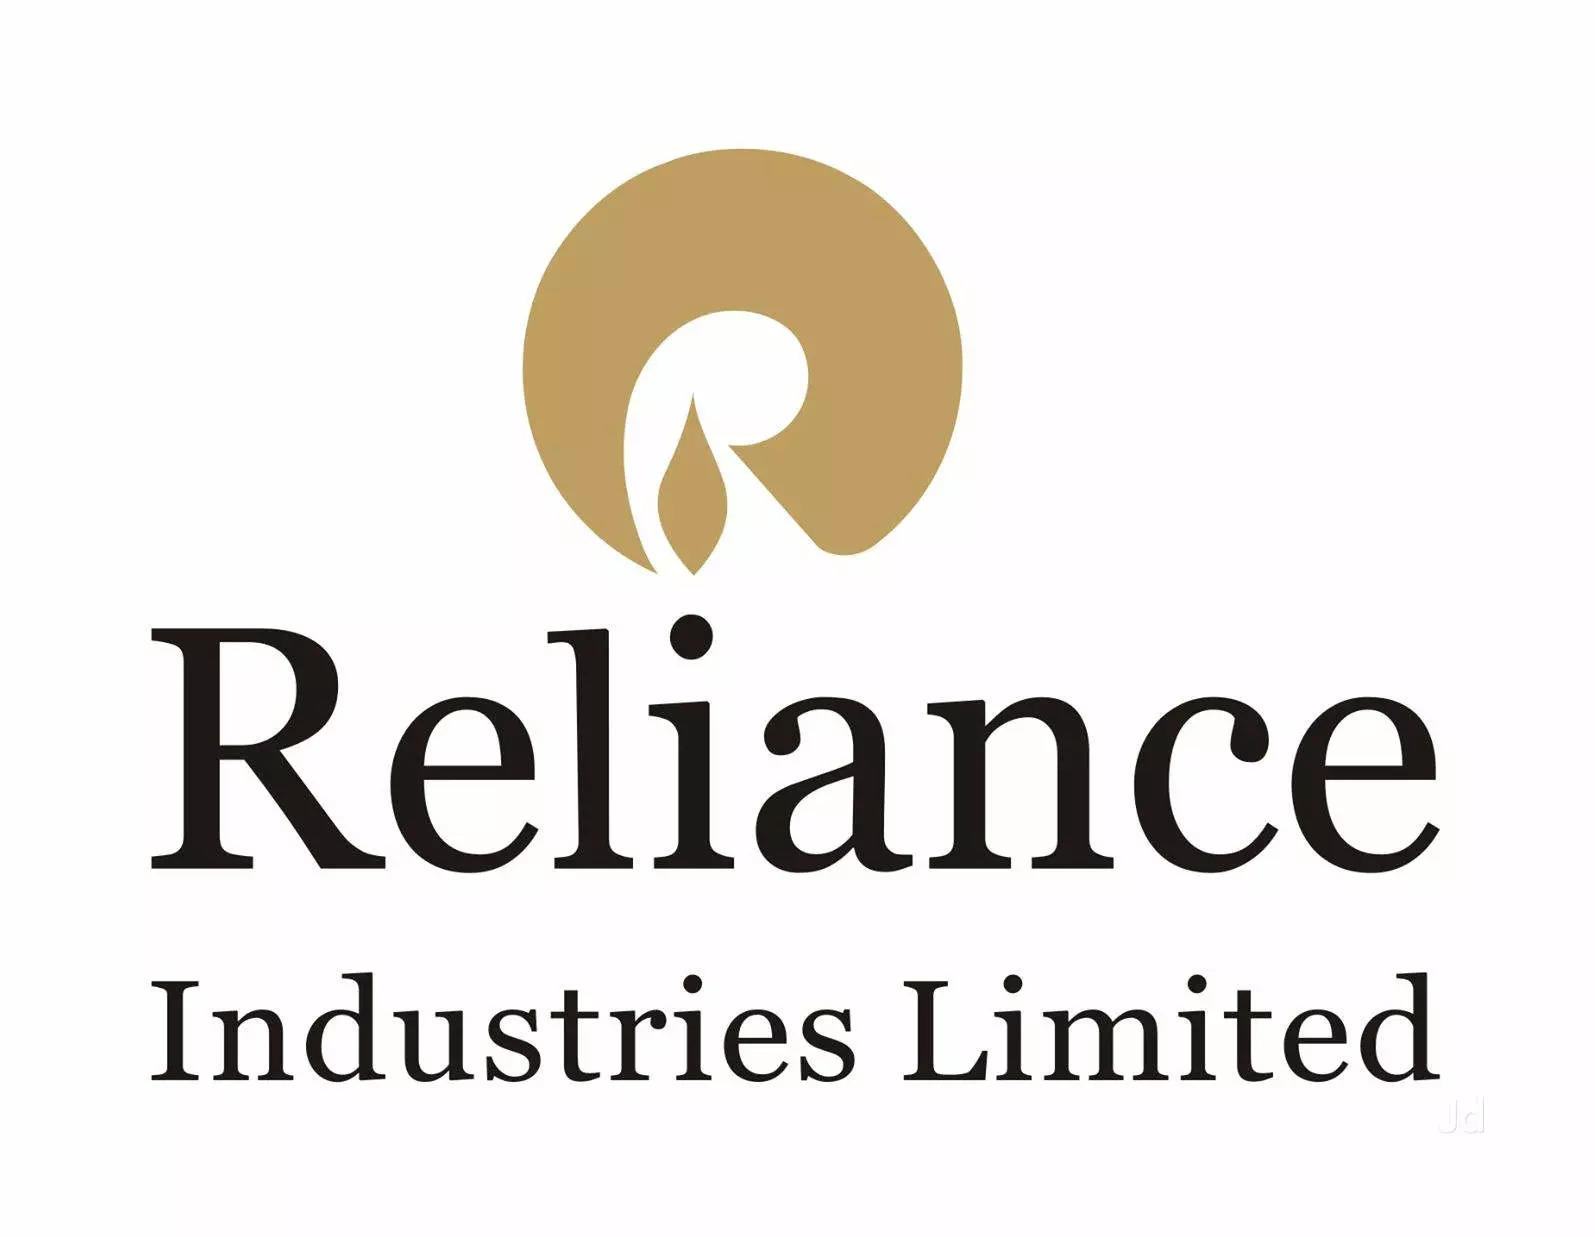 reliance industries net profit more than triples in the last eight quarters to $2.8 billion | business insider india